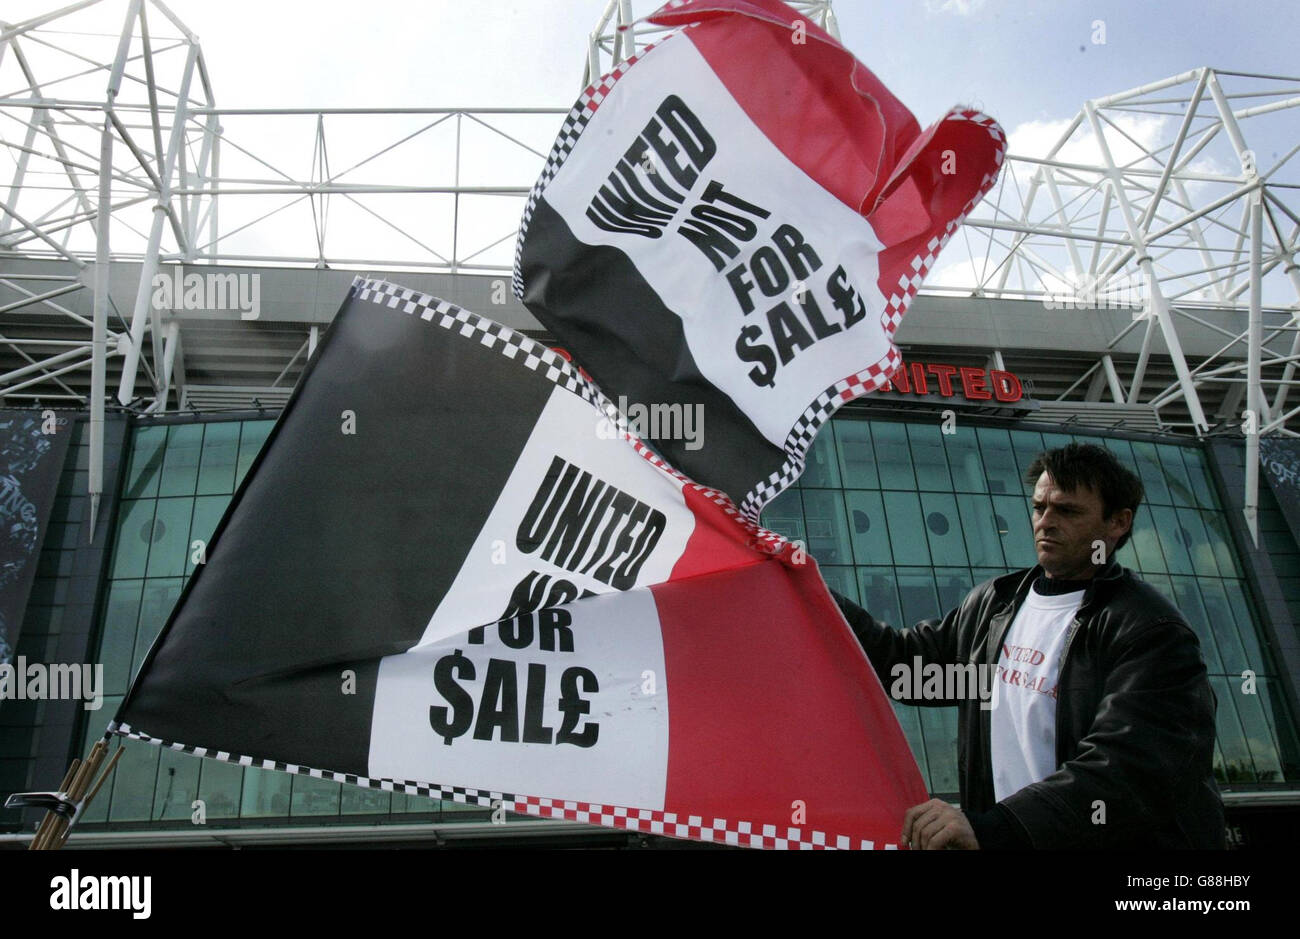 Soccer - Manchester United takeover - Old Trafford. A Manchester United fan sells anti-Glazer flag. Stock Photo